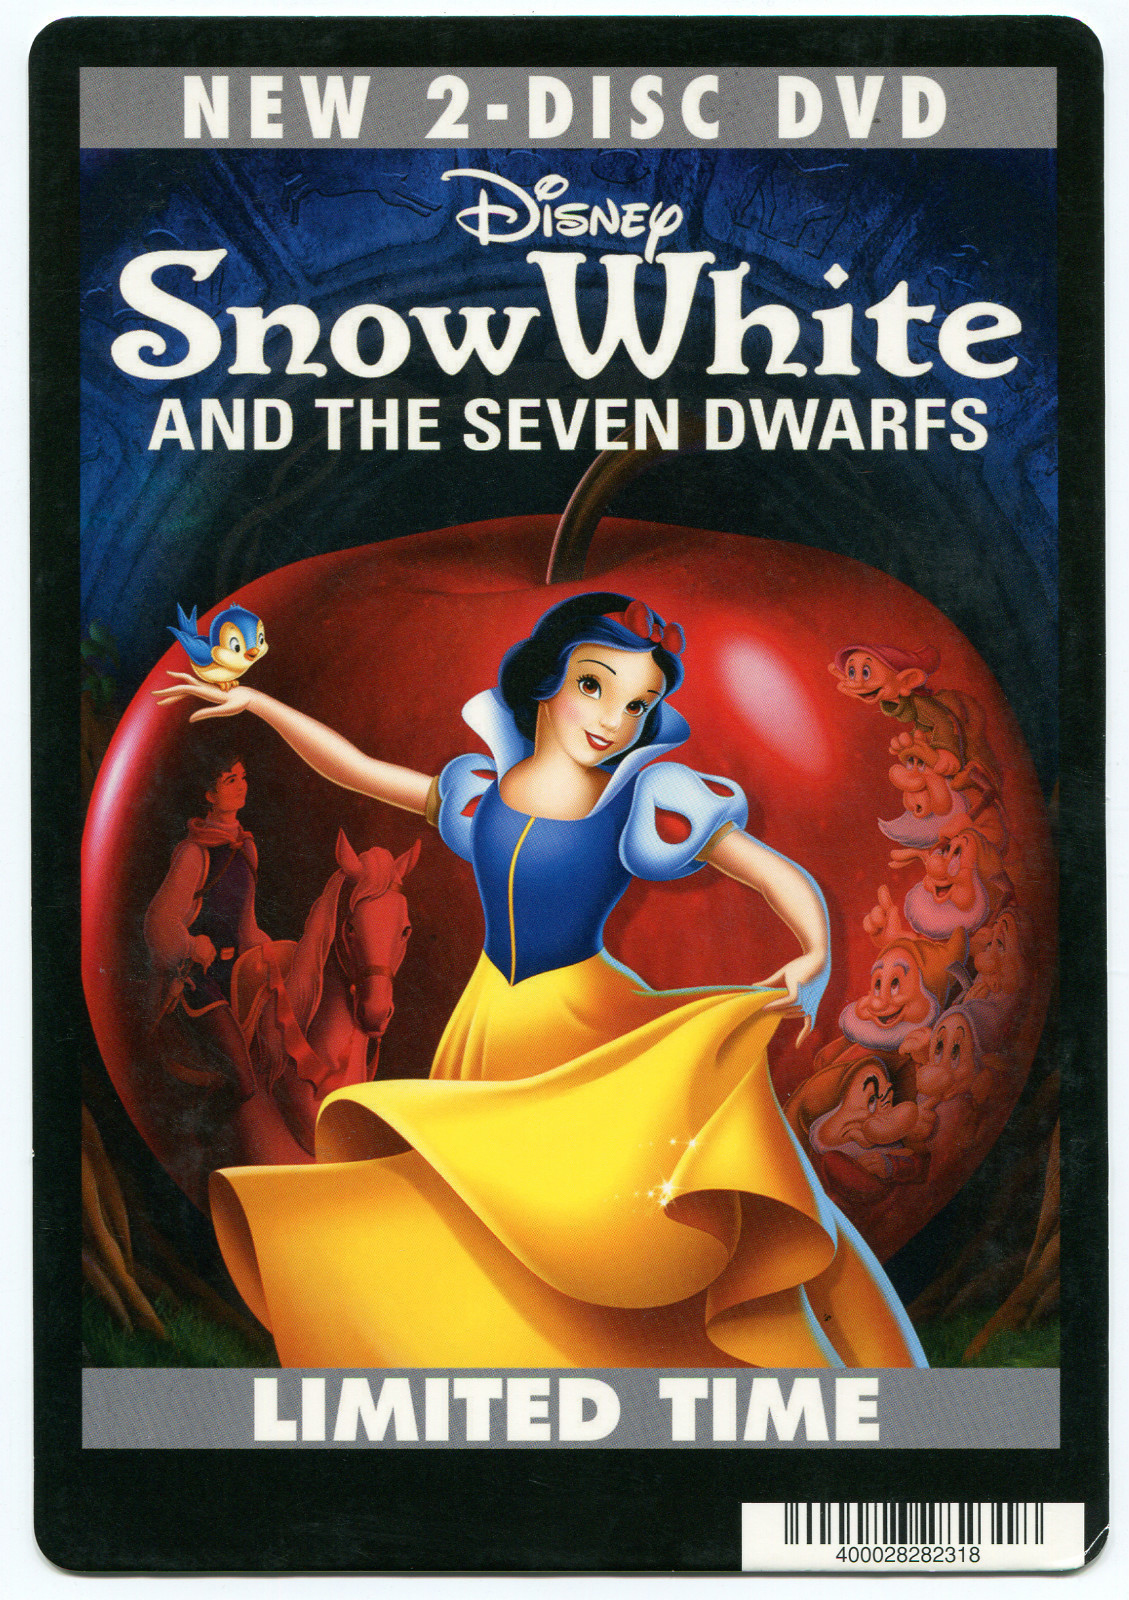 Filmic Light Snow White Archive 2009 Video Store Dvd Card